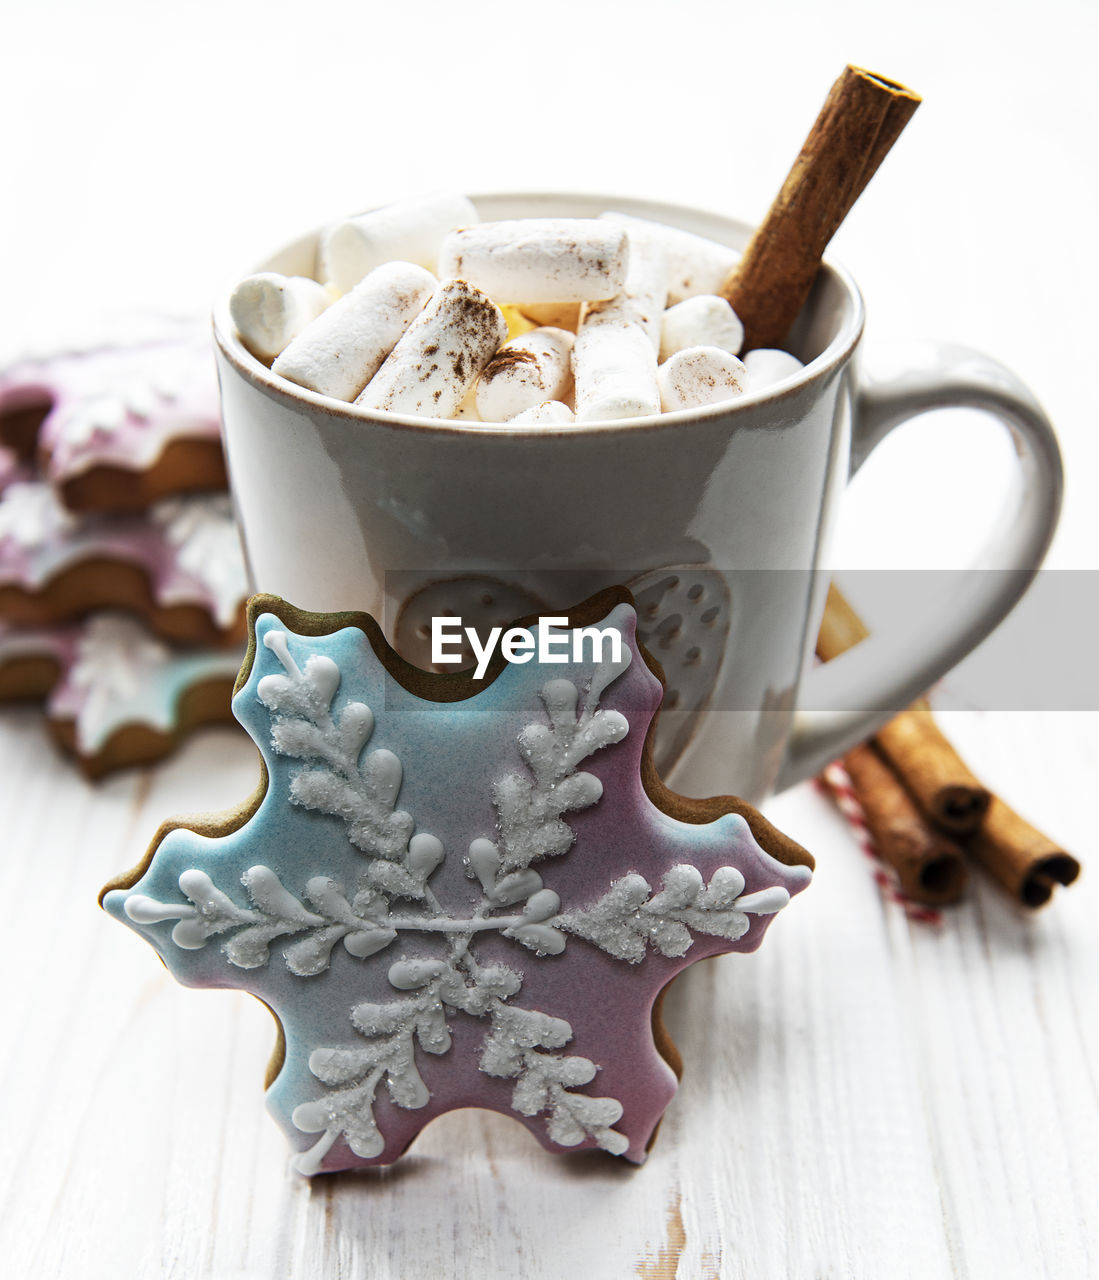 Christmas cocoa, gingerbread cookies and decorations. white wooden background.